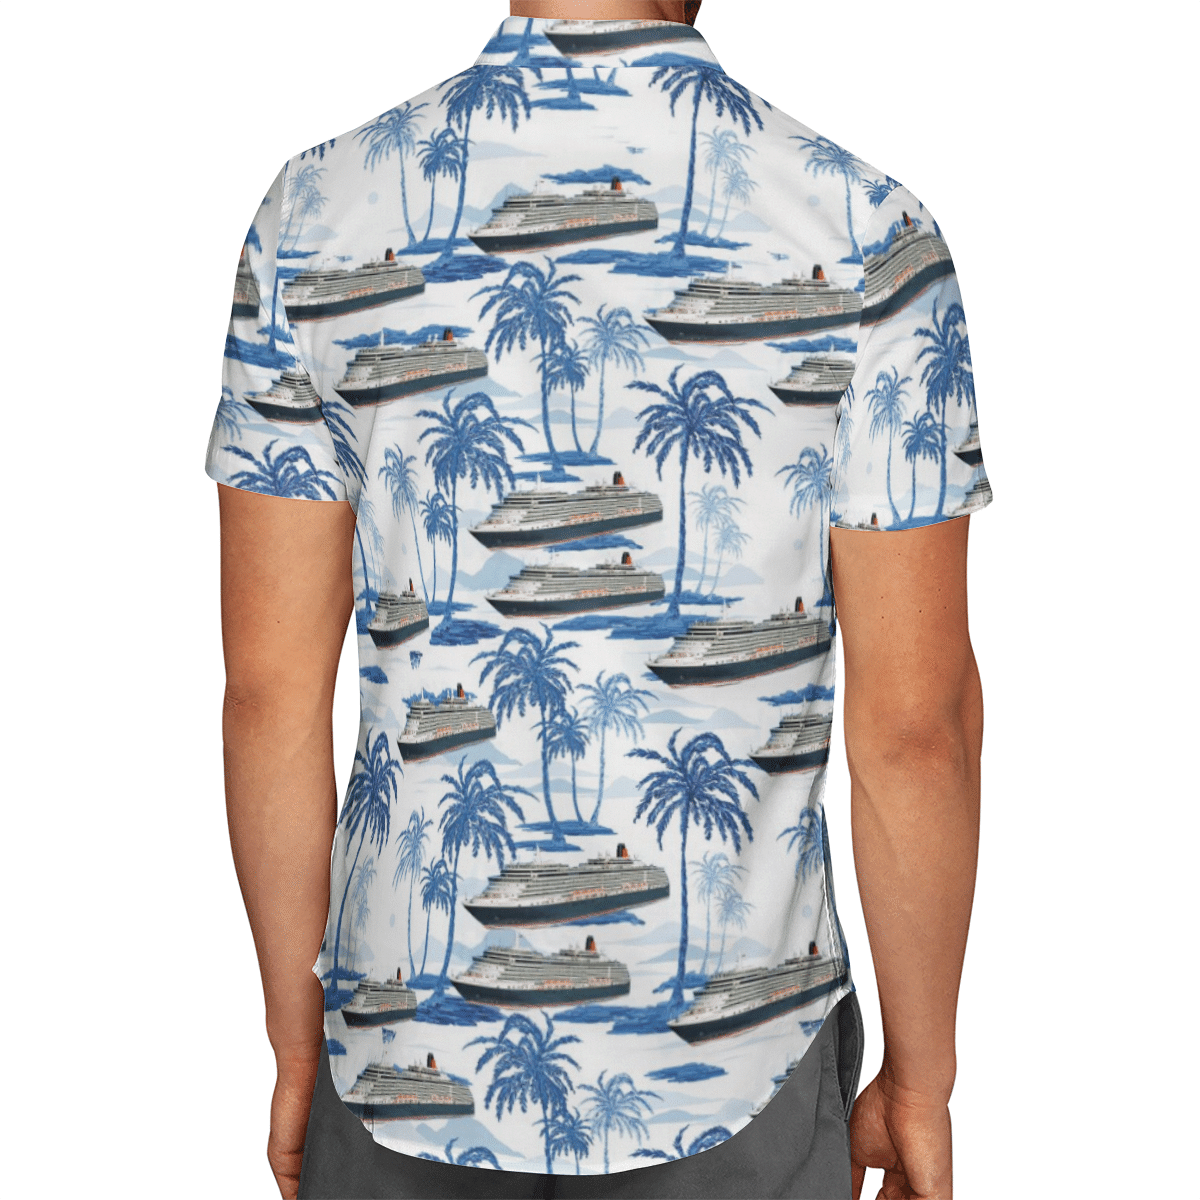 Going to the beach with a quality shirt 17